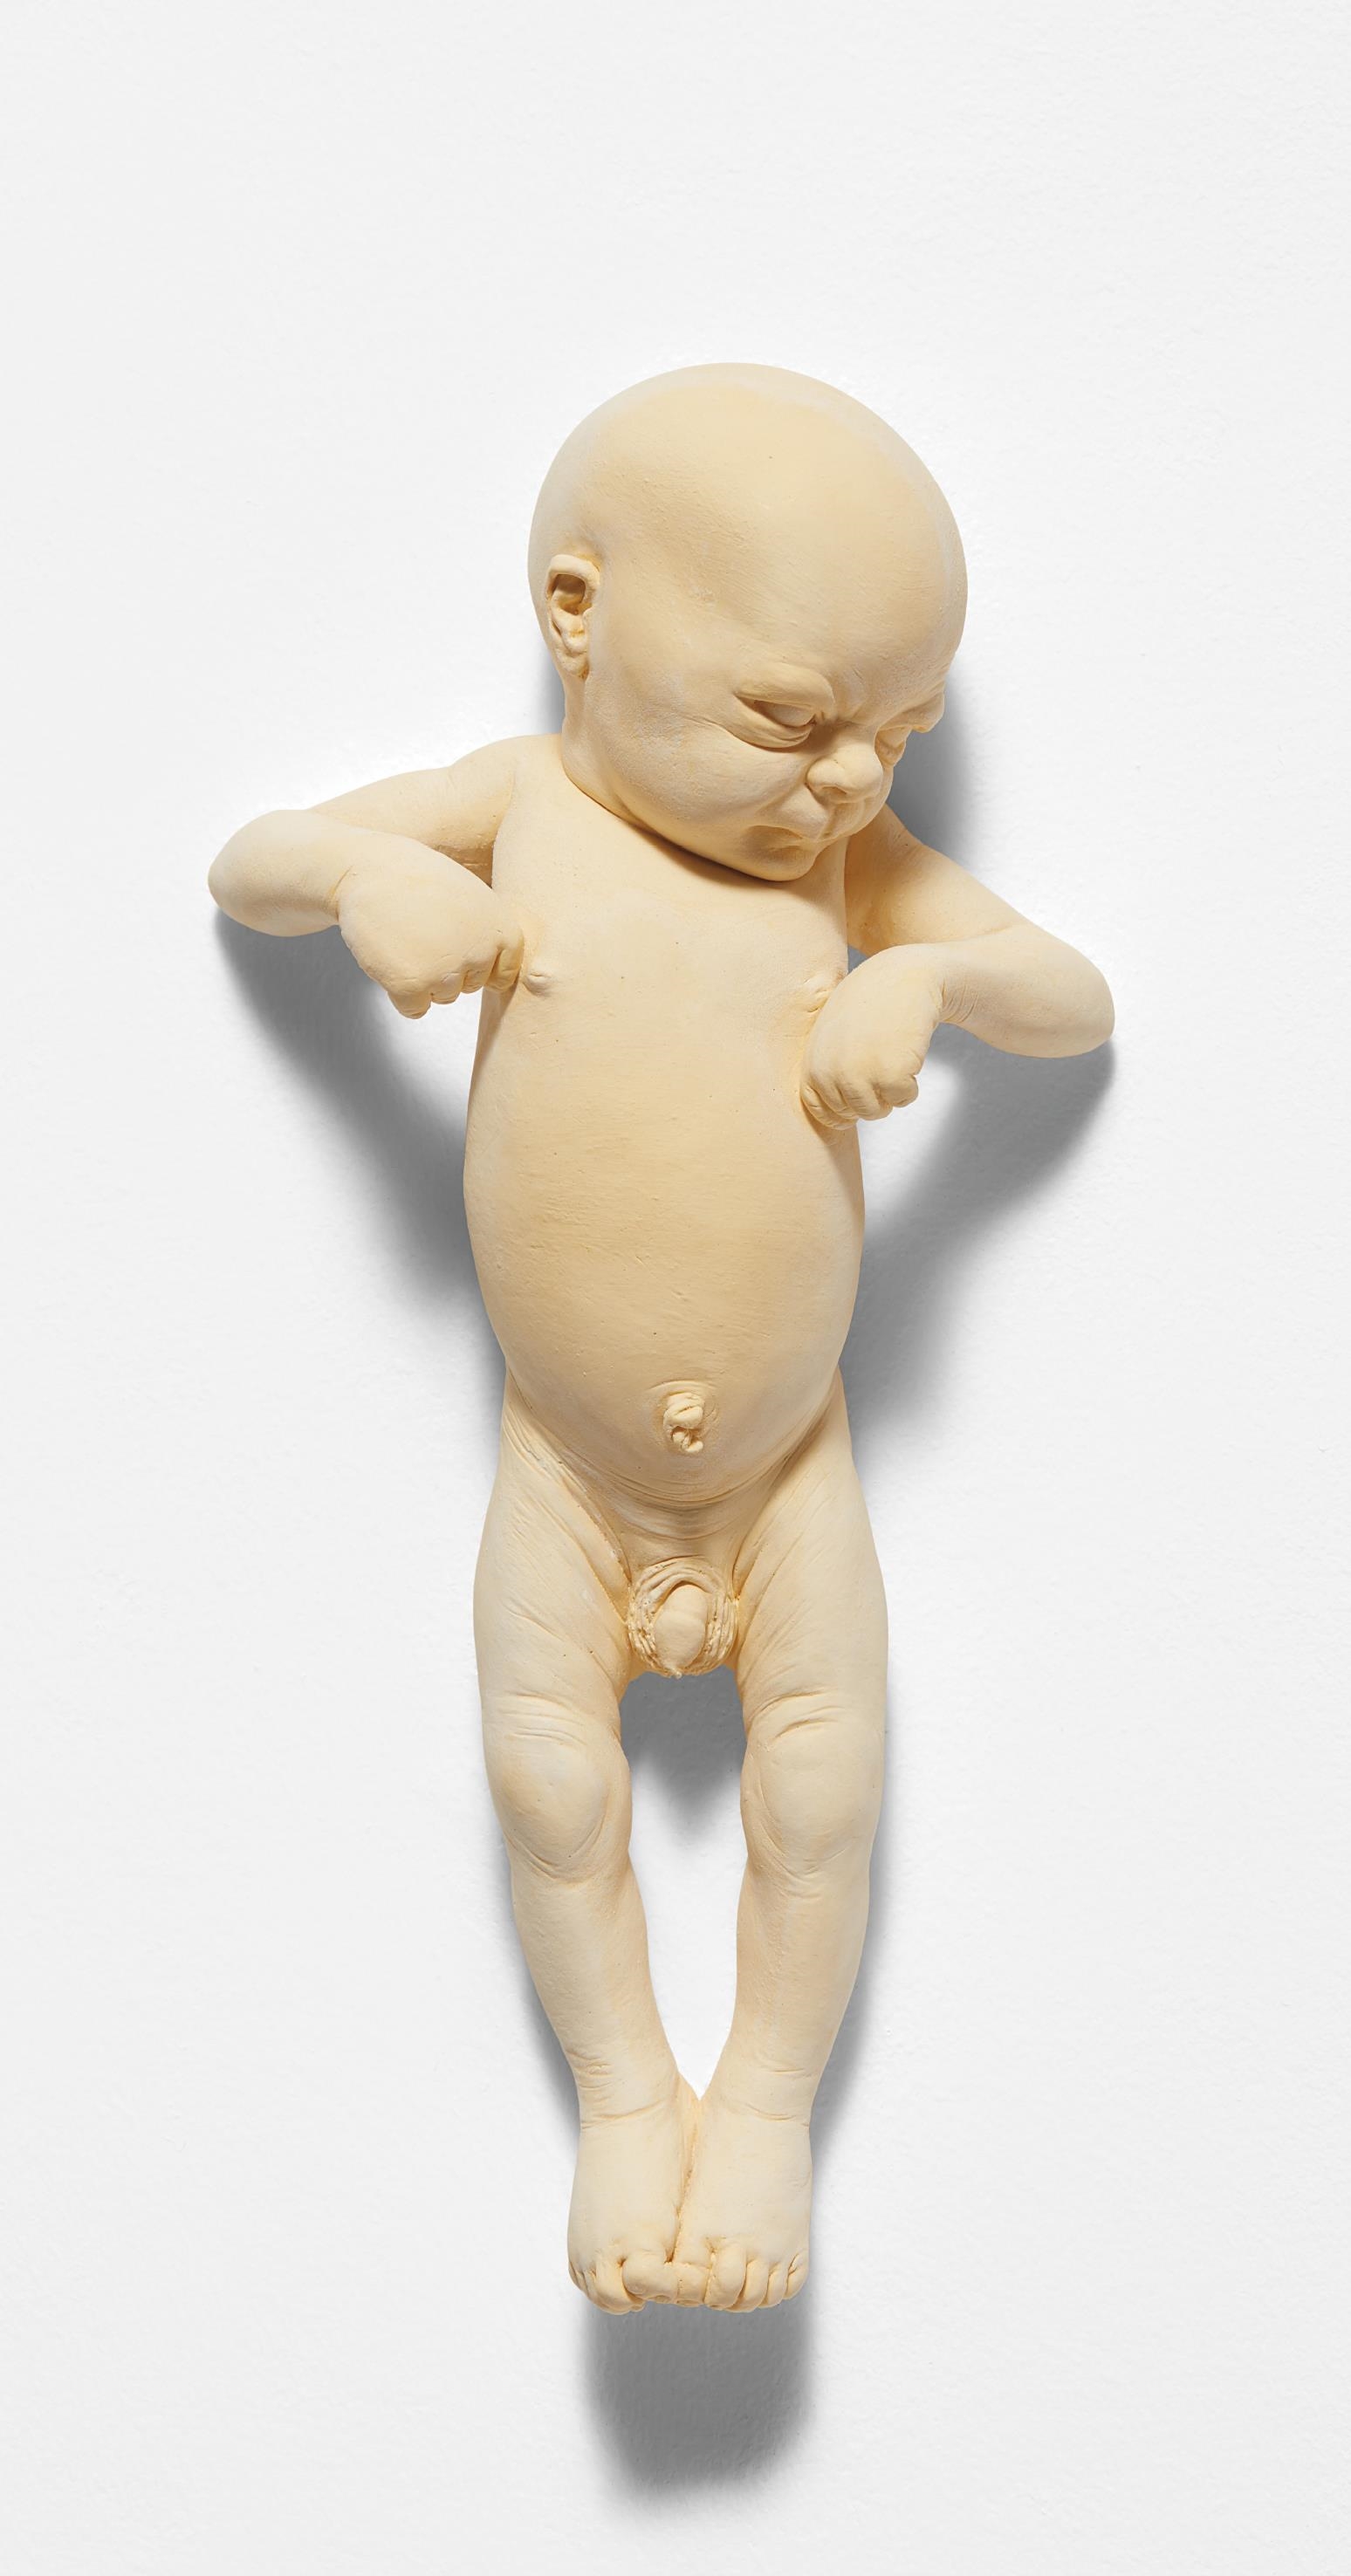 Untitled (Baby) by Ron Mueck, 2001